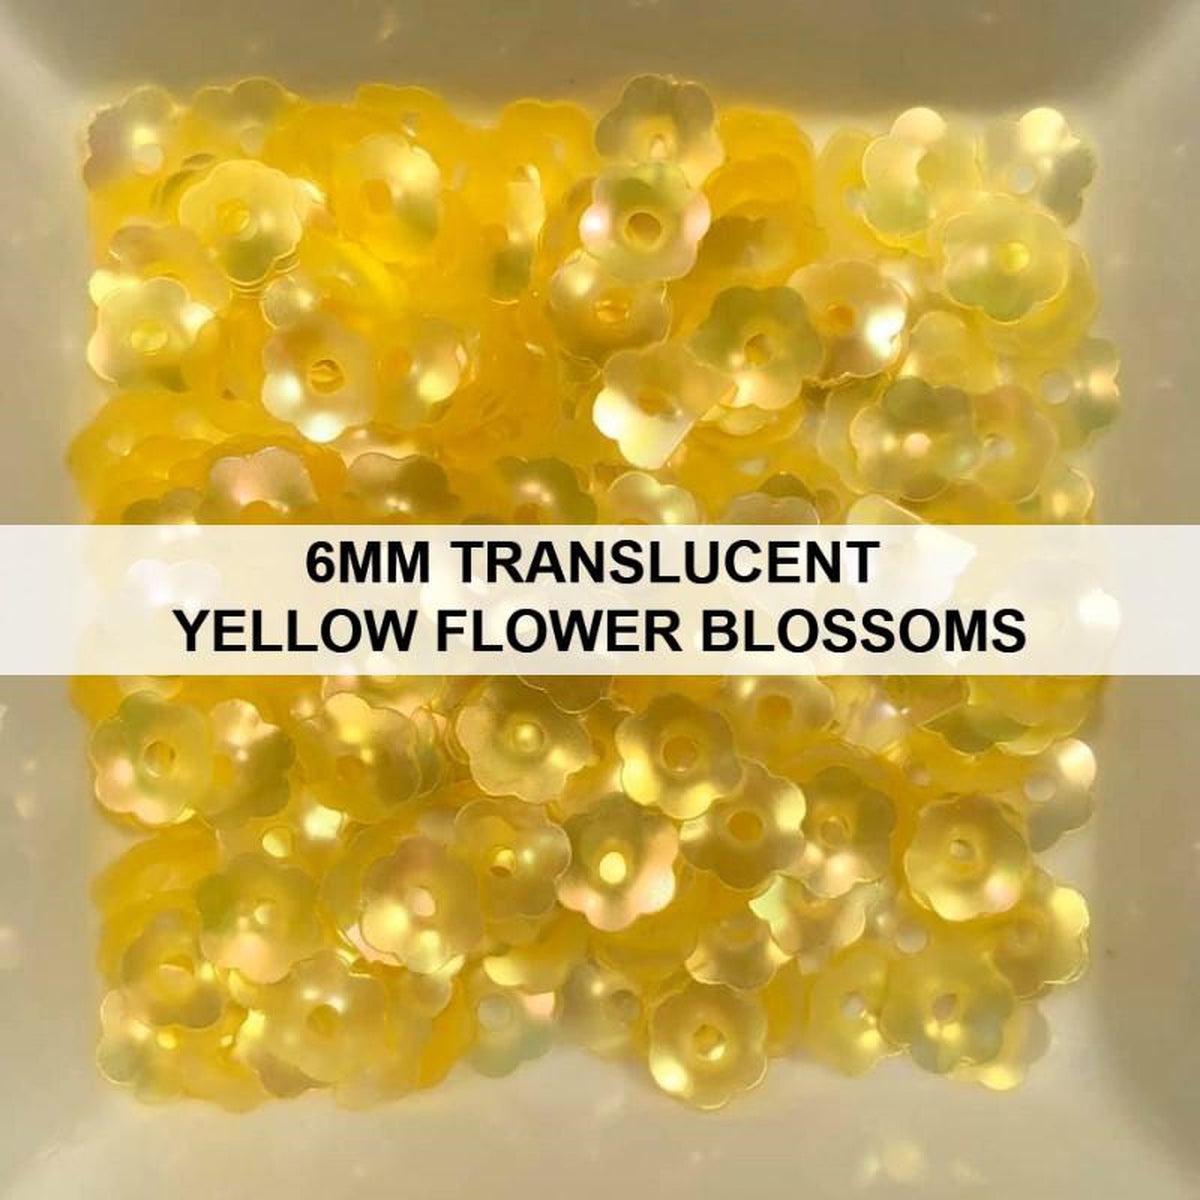 6mm Translucent Yellow Flower Blossom Sequins - Kat Scrappiness